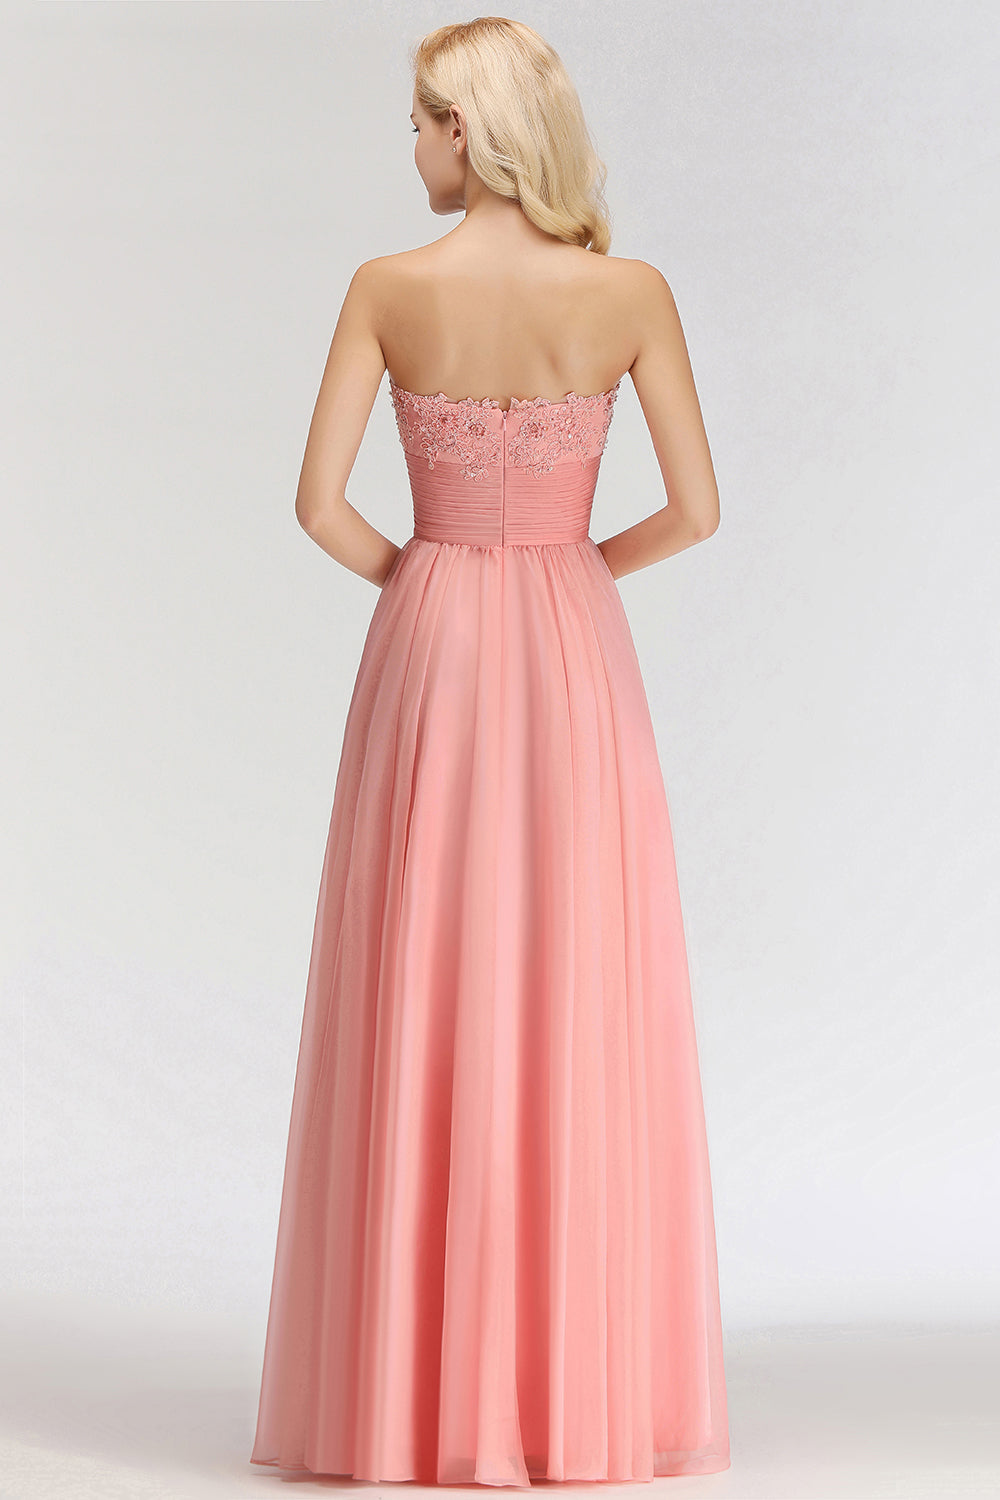 Sexy Long A-Line Sweetheart Appliques Lace Bridesmaid Dress-BIZTUNNEL